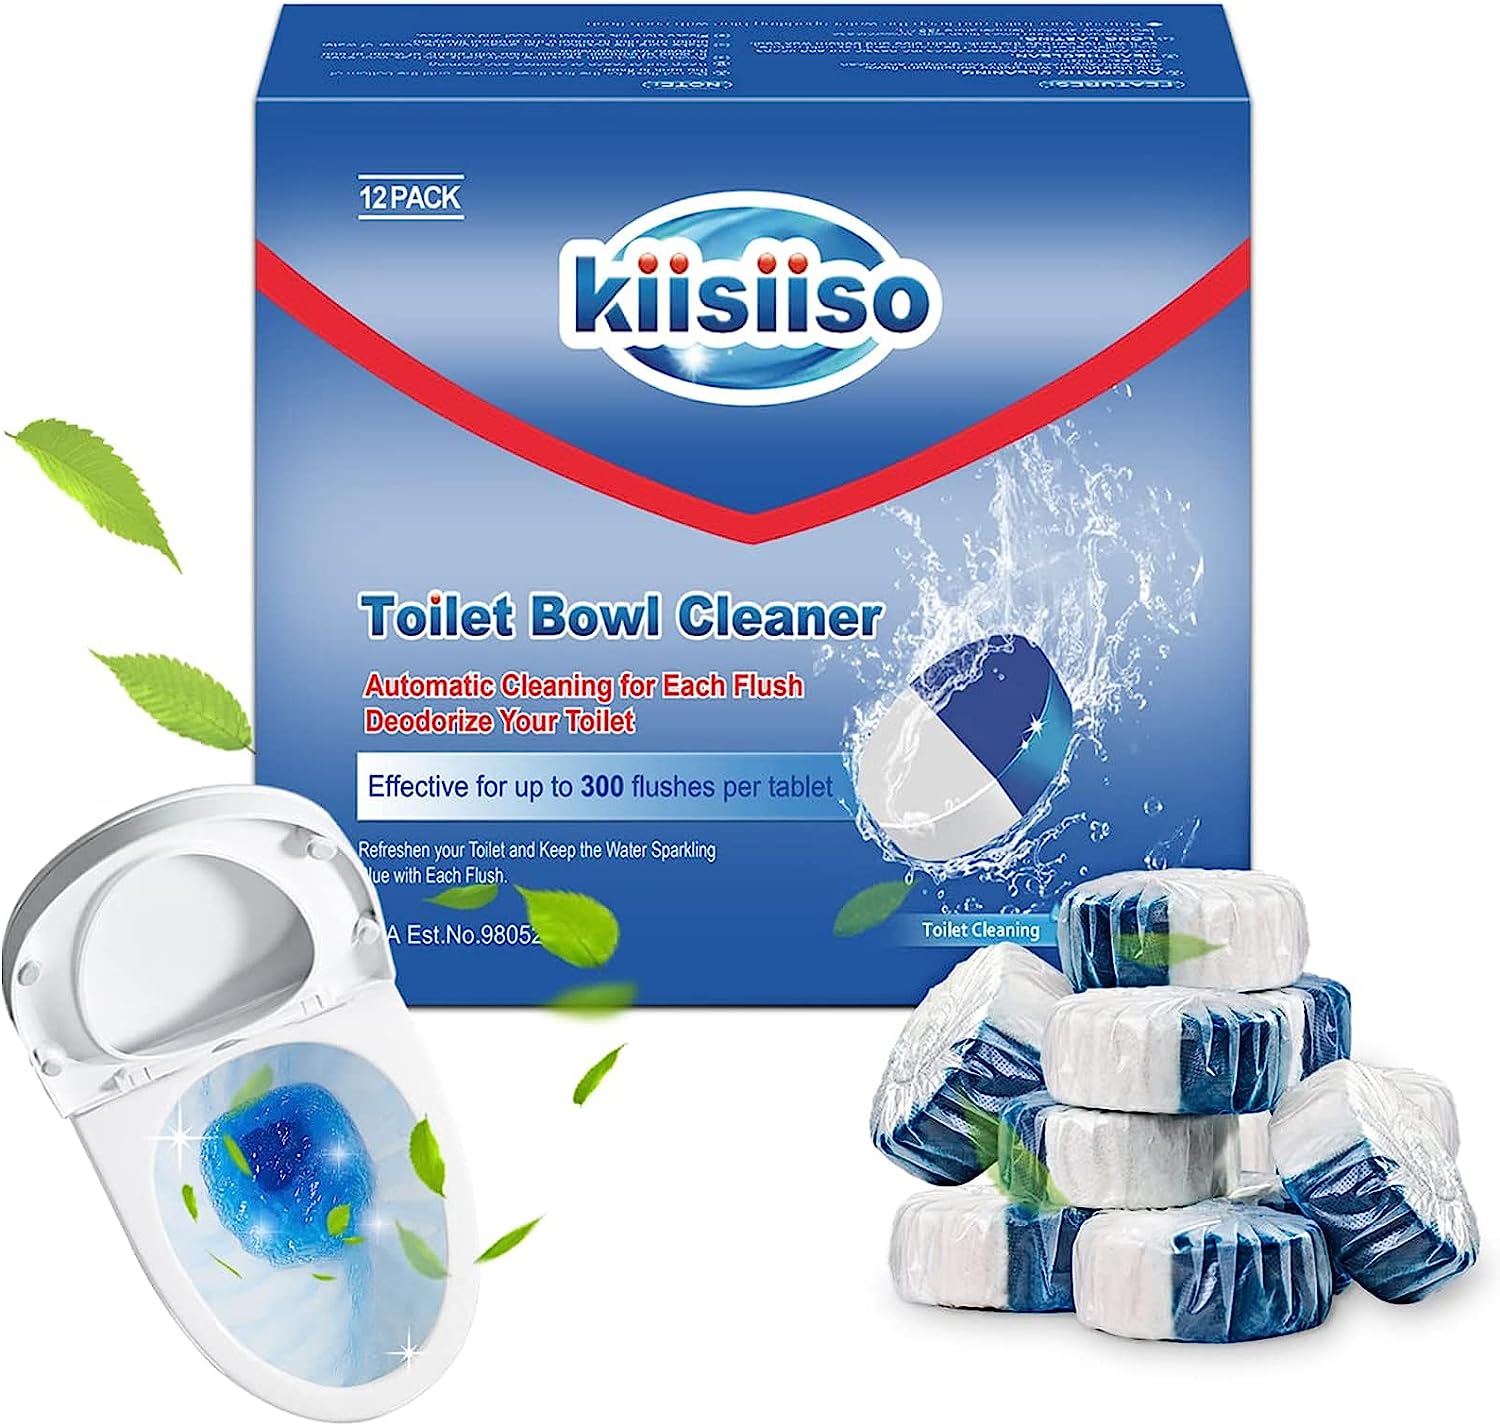 KIISSIISO Toilet Bowl Cleaner Tablets, 12 PACK [...]